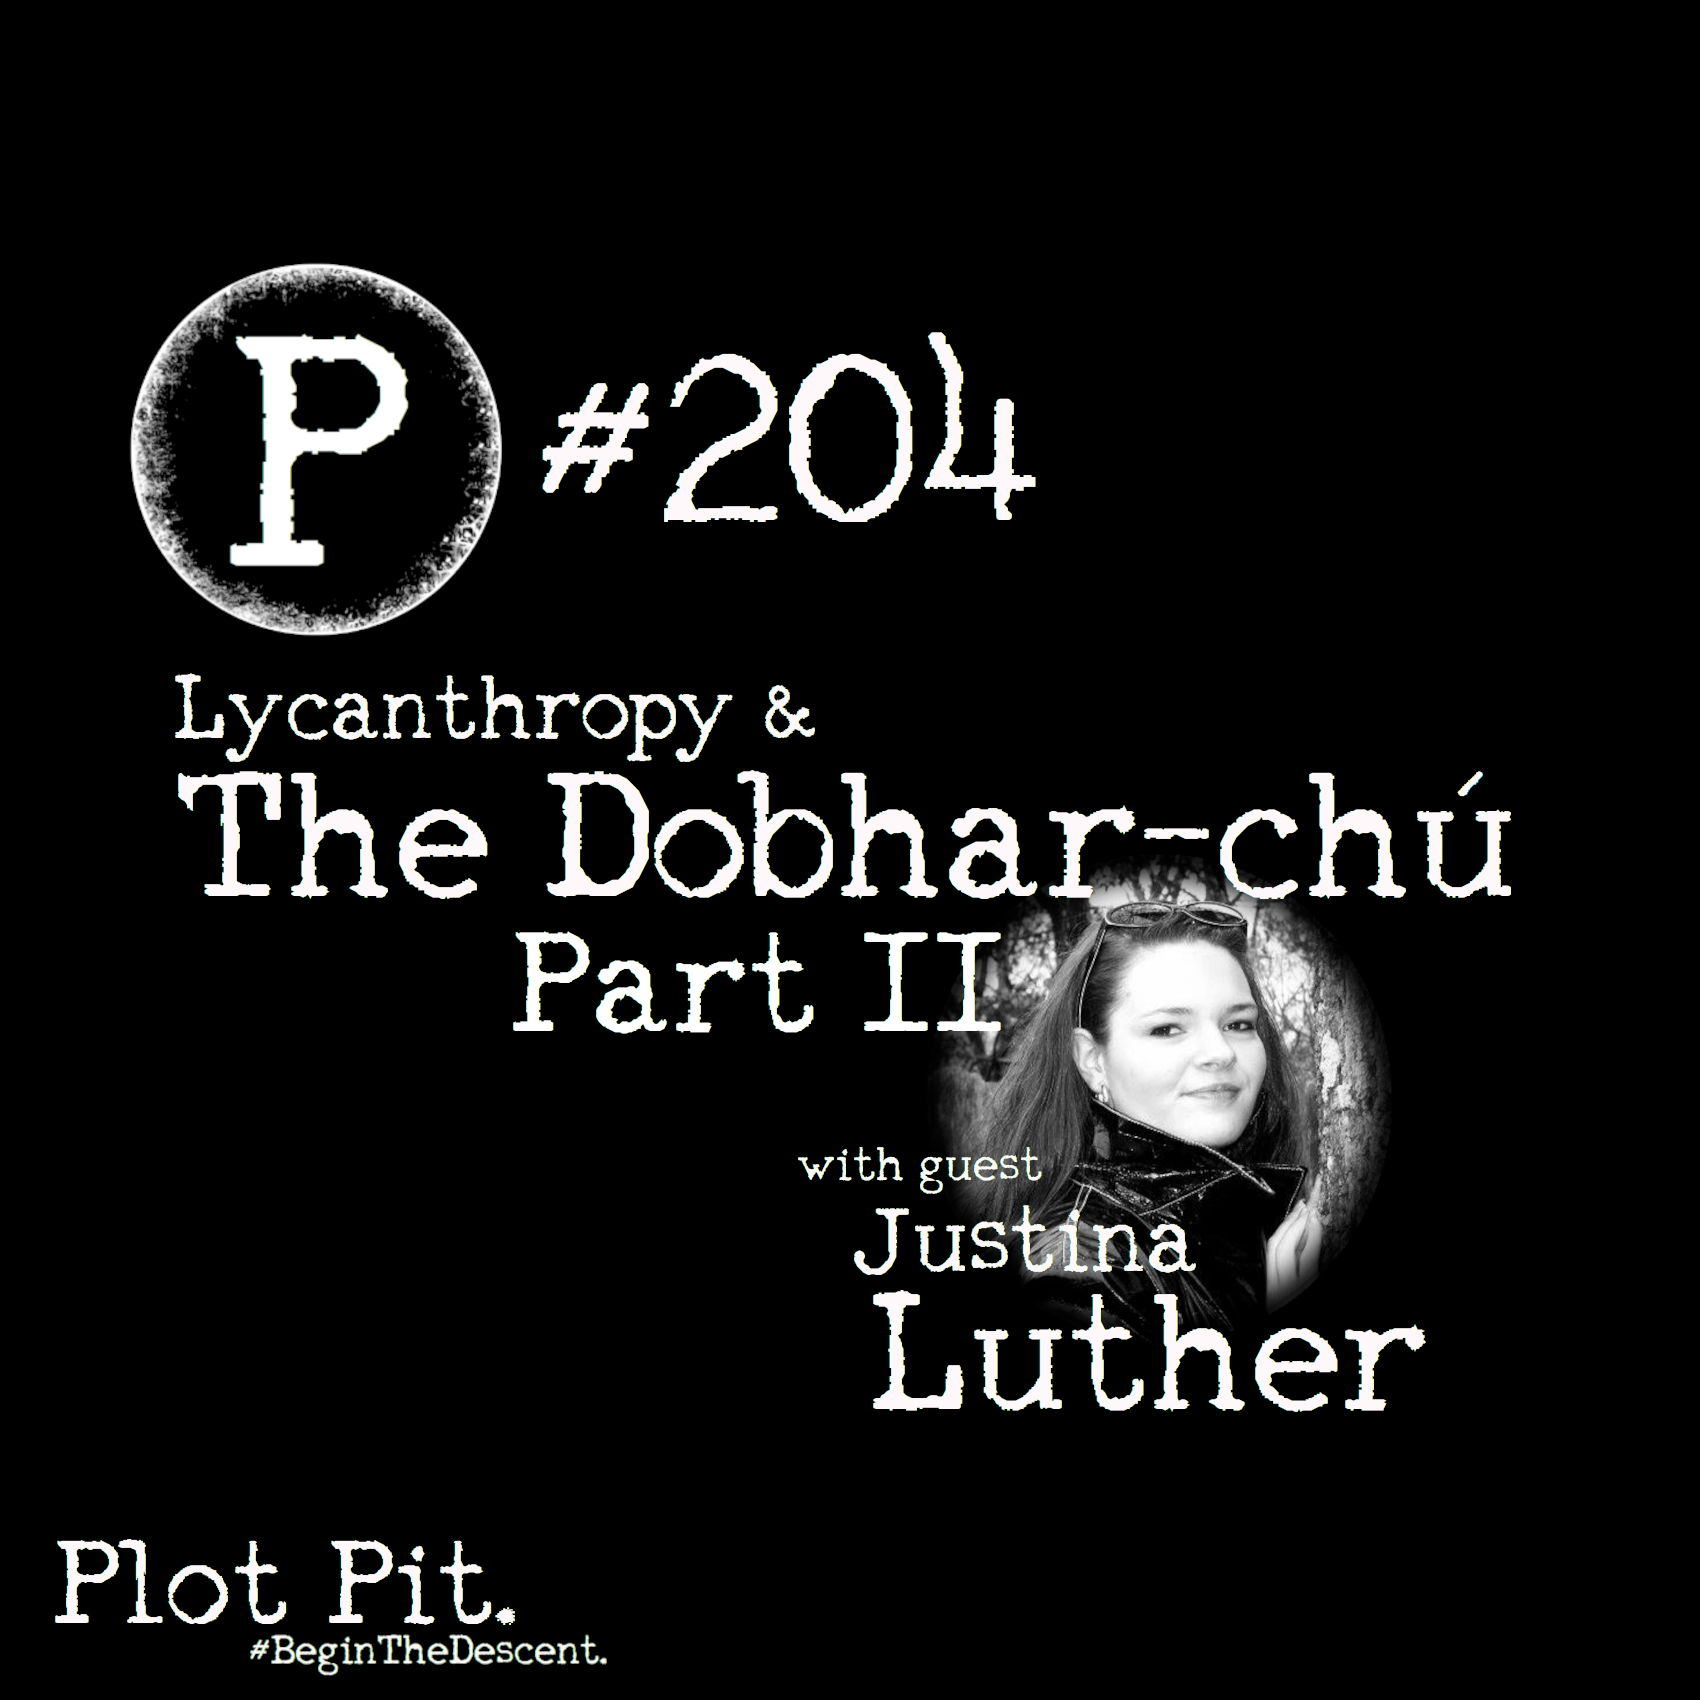 Lycanthropy & Dobhar-chú with Justina Luther - Part 2 of 2